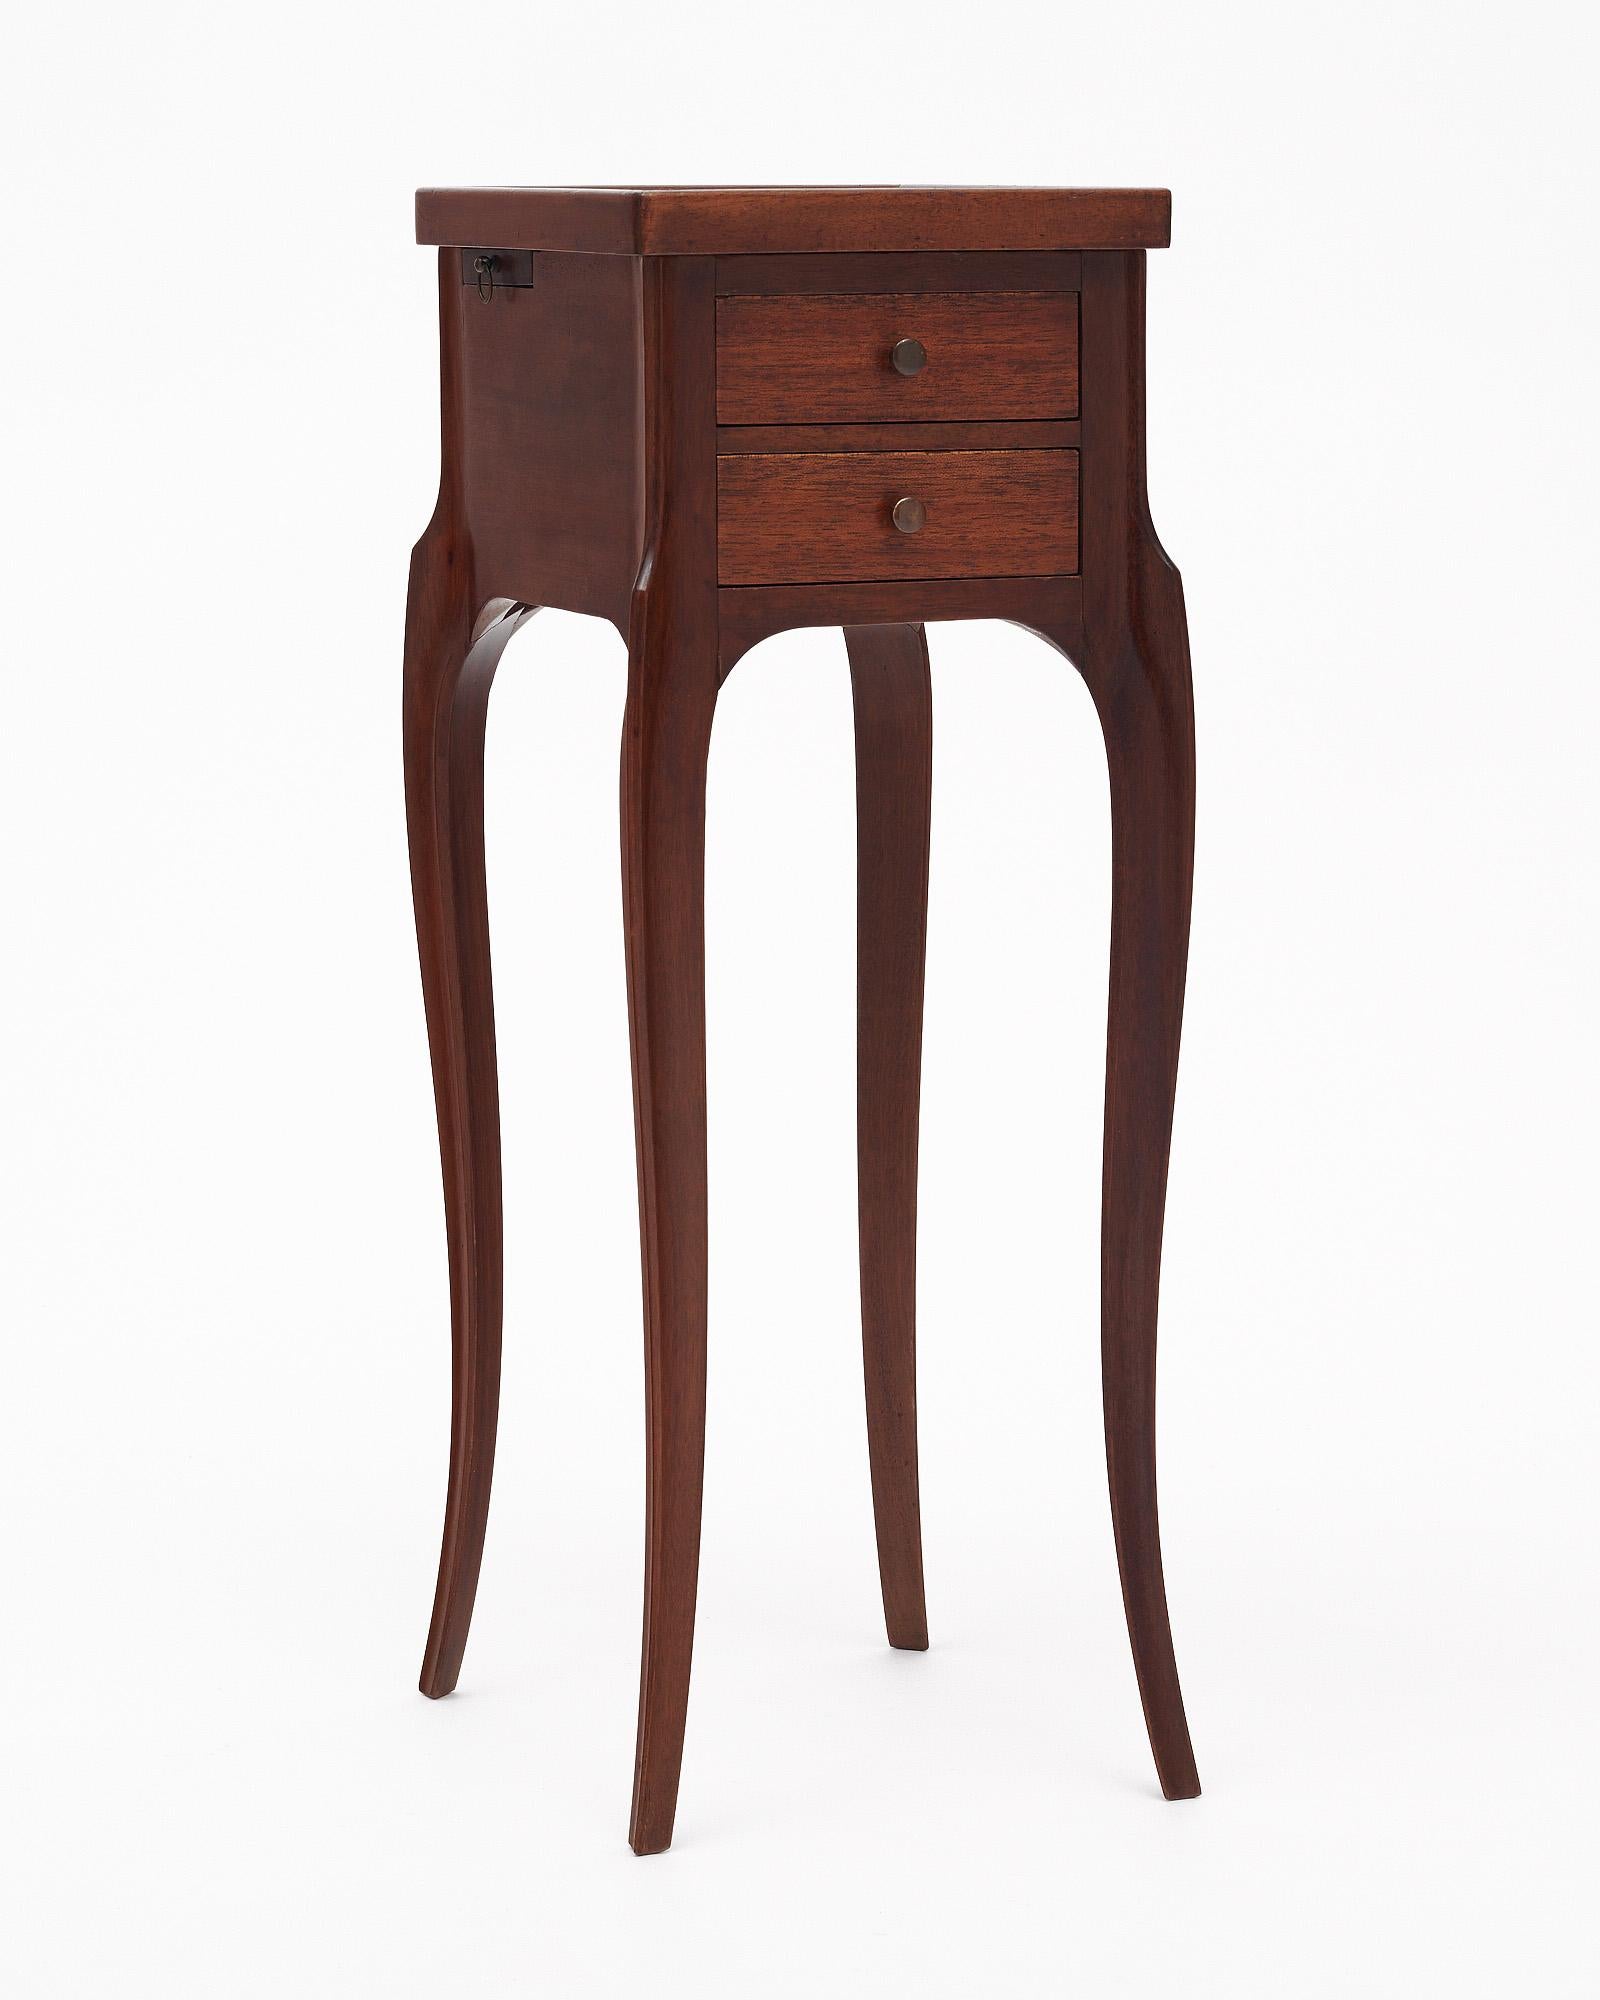 Side table from France made of walnut with long “cabriole